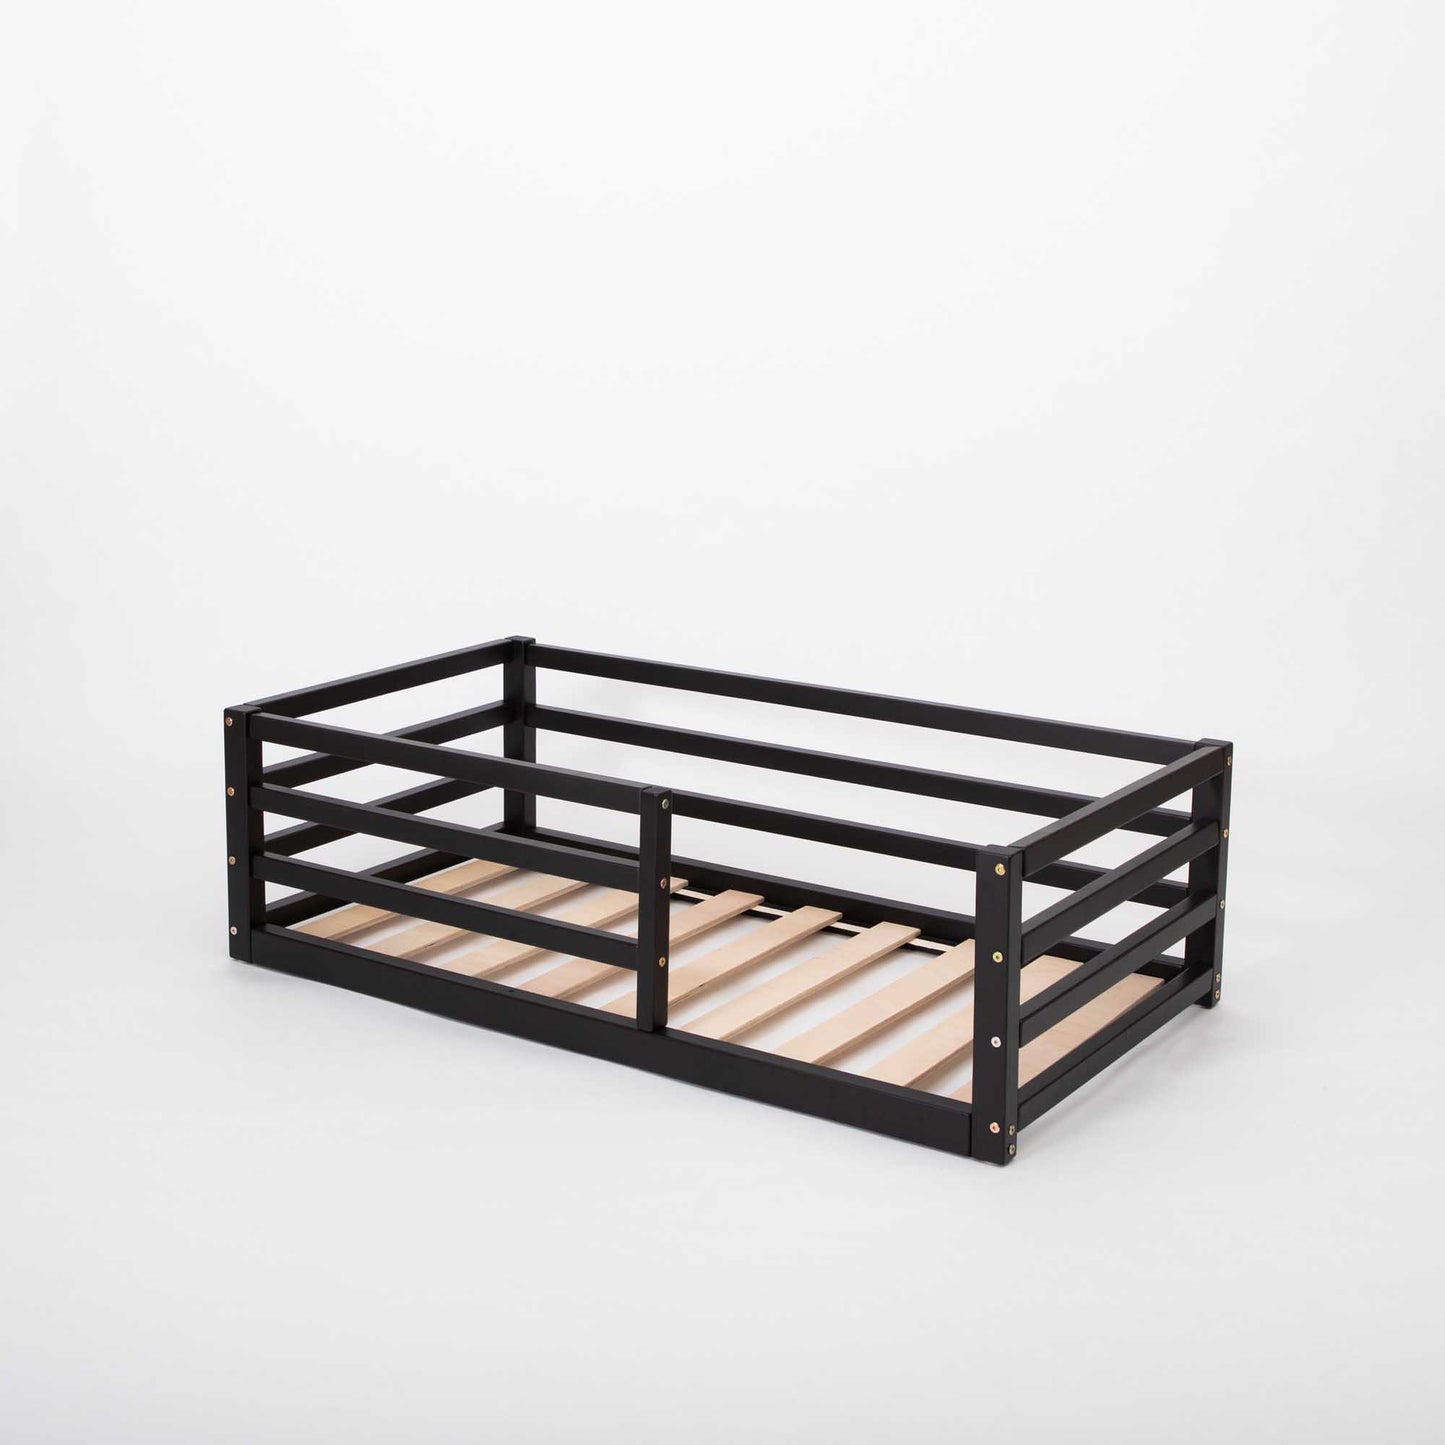 A transitional piece for independent sleeping, this Floor-level kids' bed with a horizontal rail fence from Sweet Home From Wood features wooden slats.